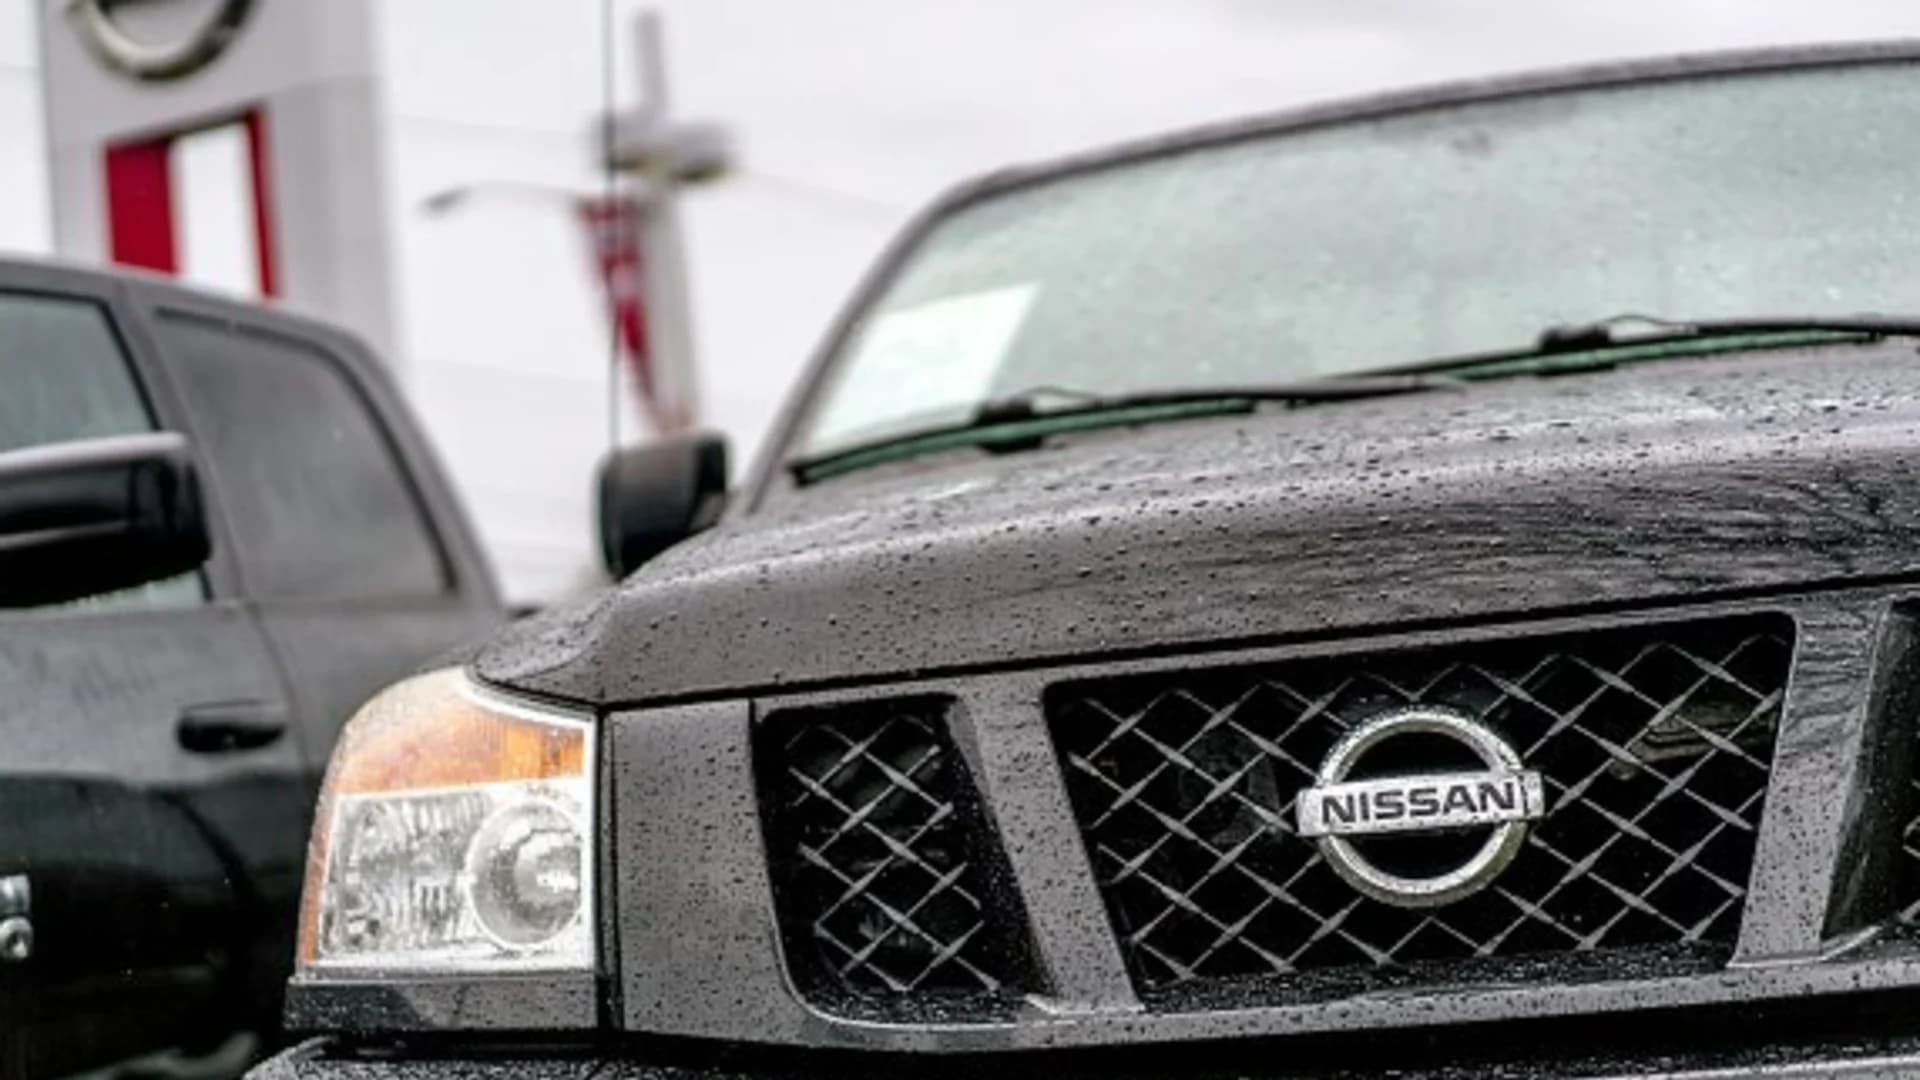 Nissan recalls about 105K cars to replace Takata air bags